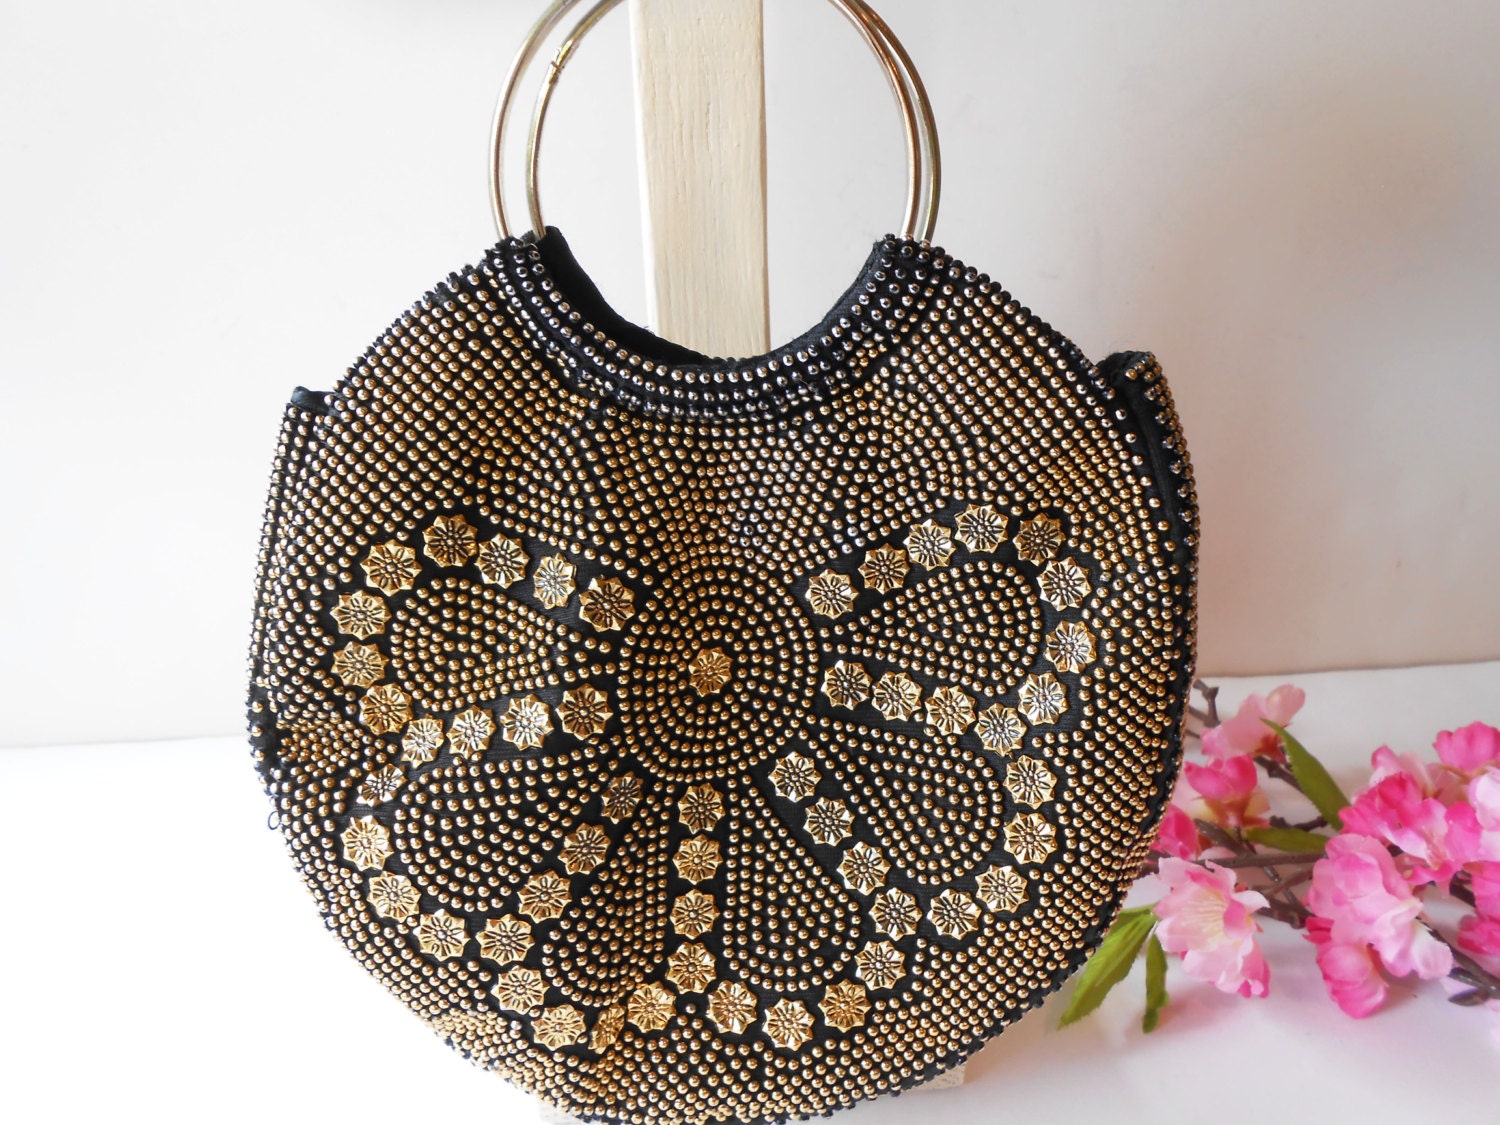 Black and Gold Evening Bag Vintage Beaded by LittleBitsofGlamour